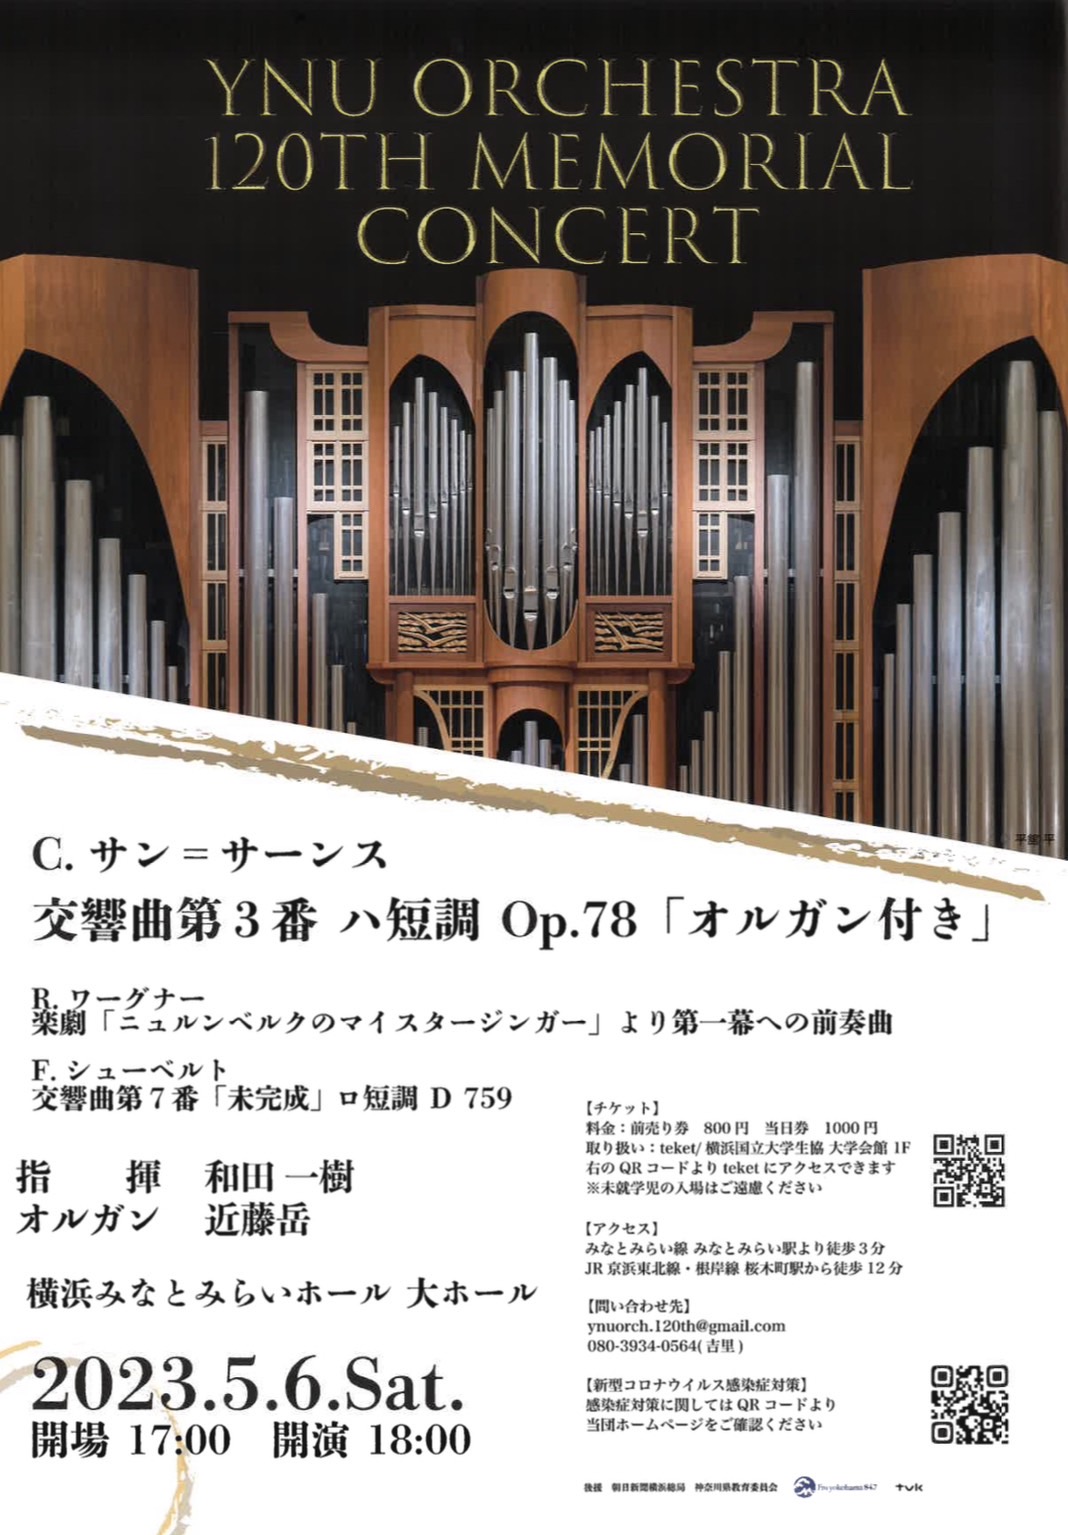 YNU ORCHESTRA 120TH MEMORIAL CONCERTの画像